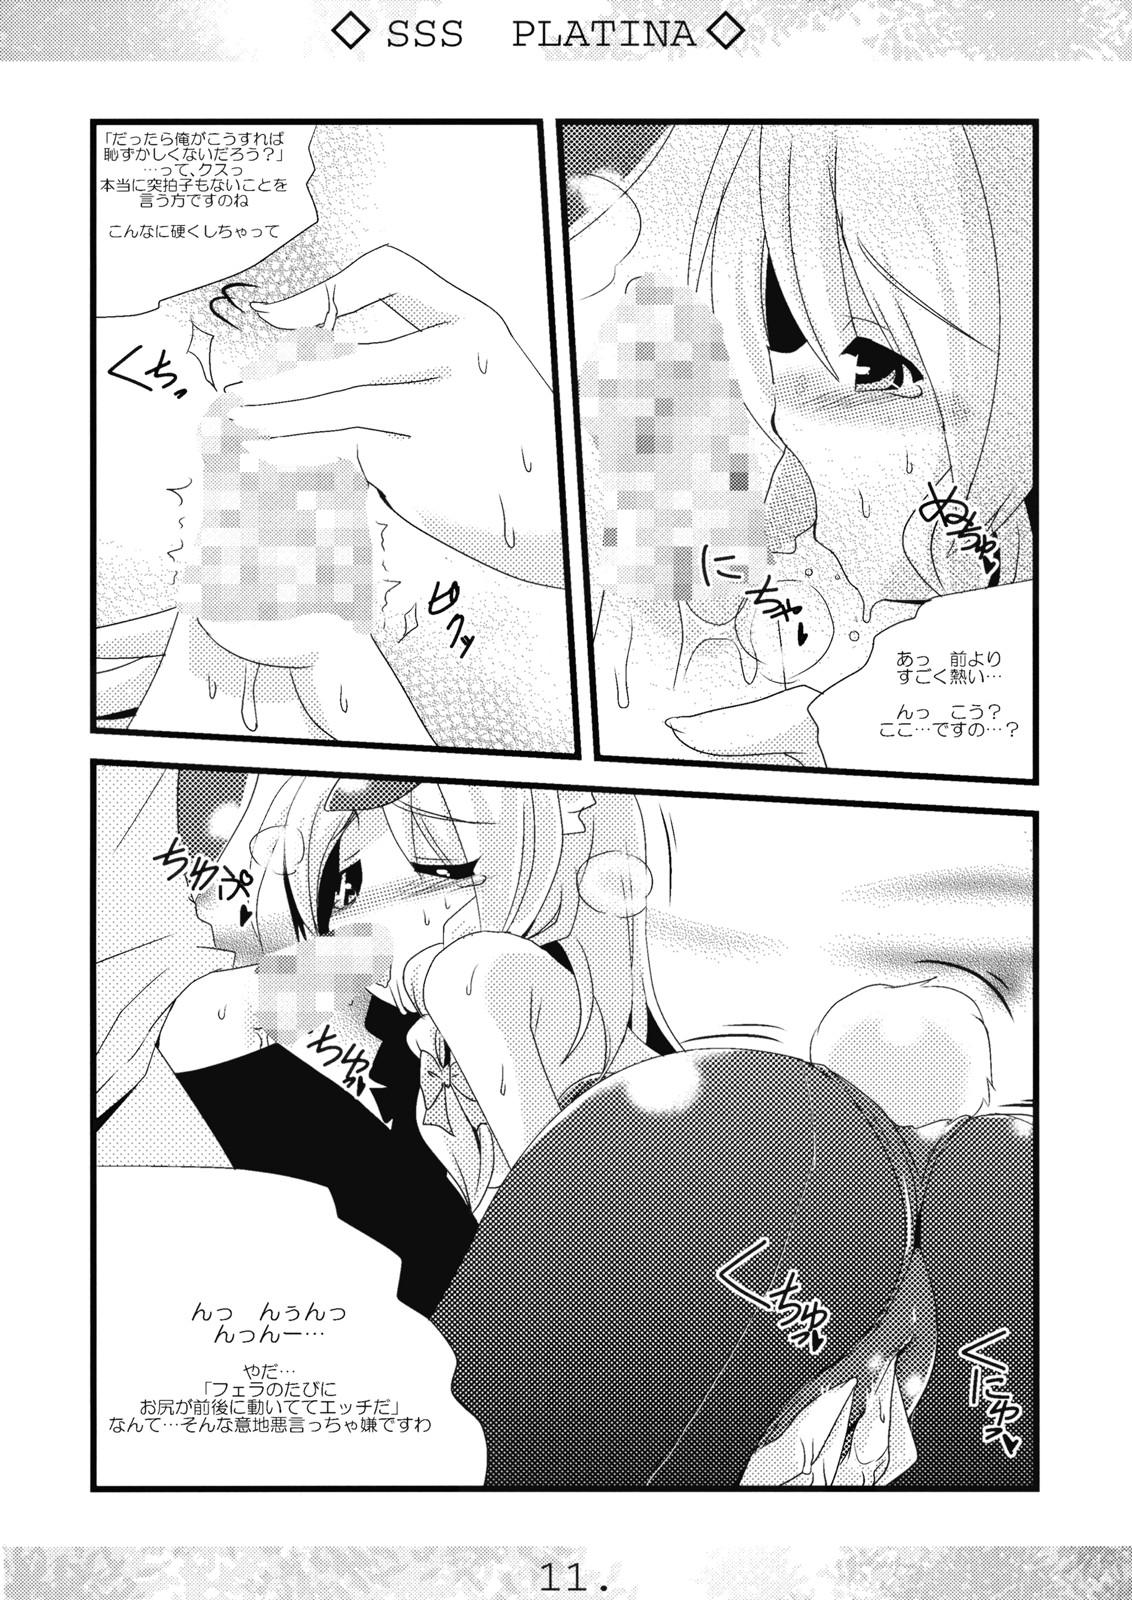 Couple Sex SSS PLATINA - Touhou project Cum Swallowing - Page 11